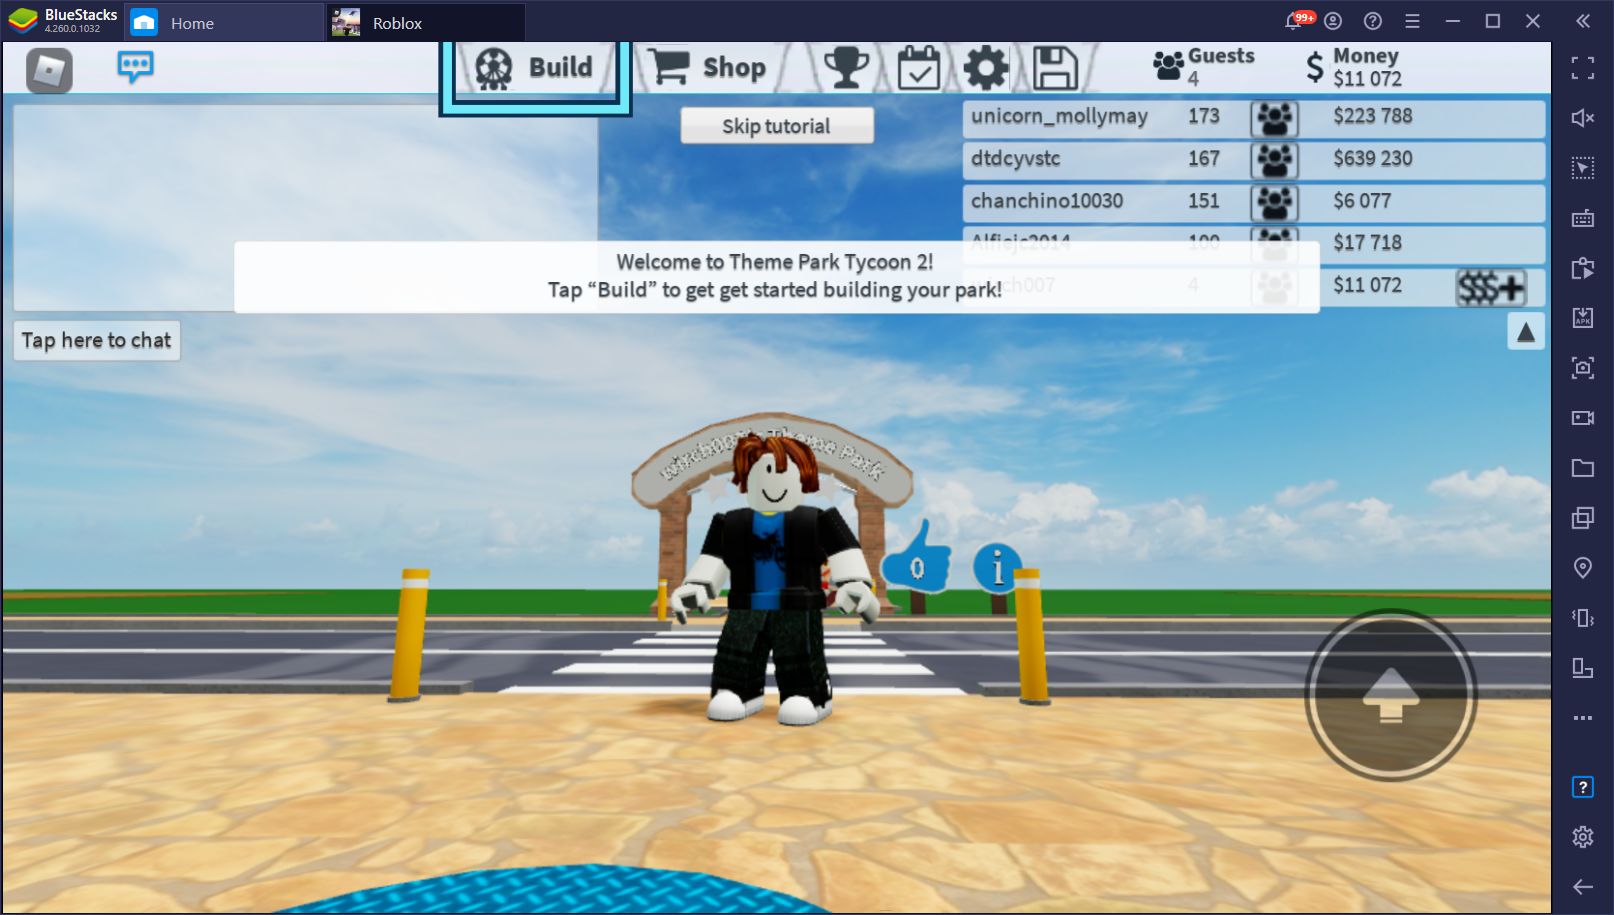 The Best Roblox Games To Play In 2021 Bluestacks - roblox game development tycoon 2